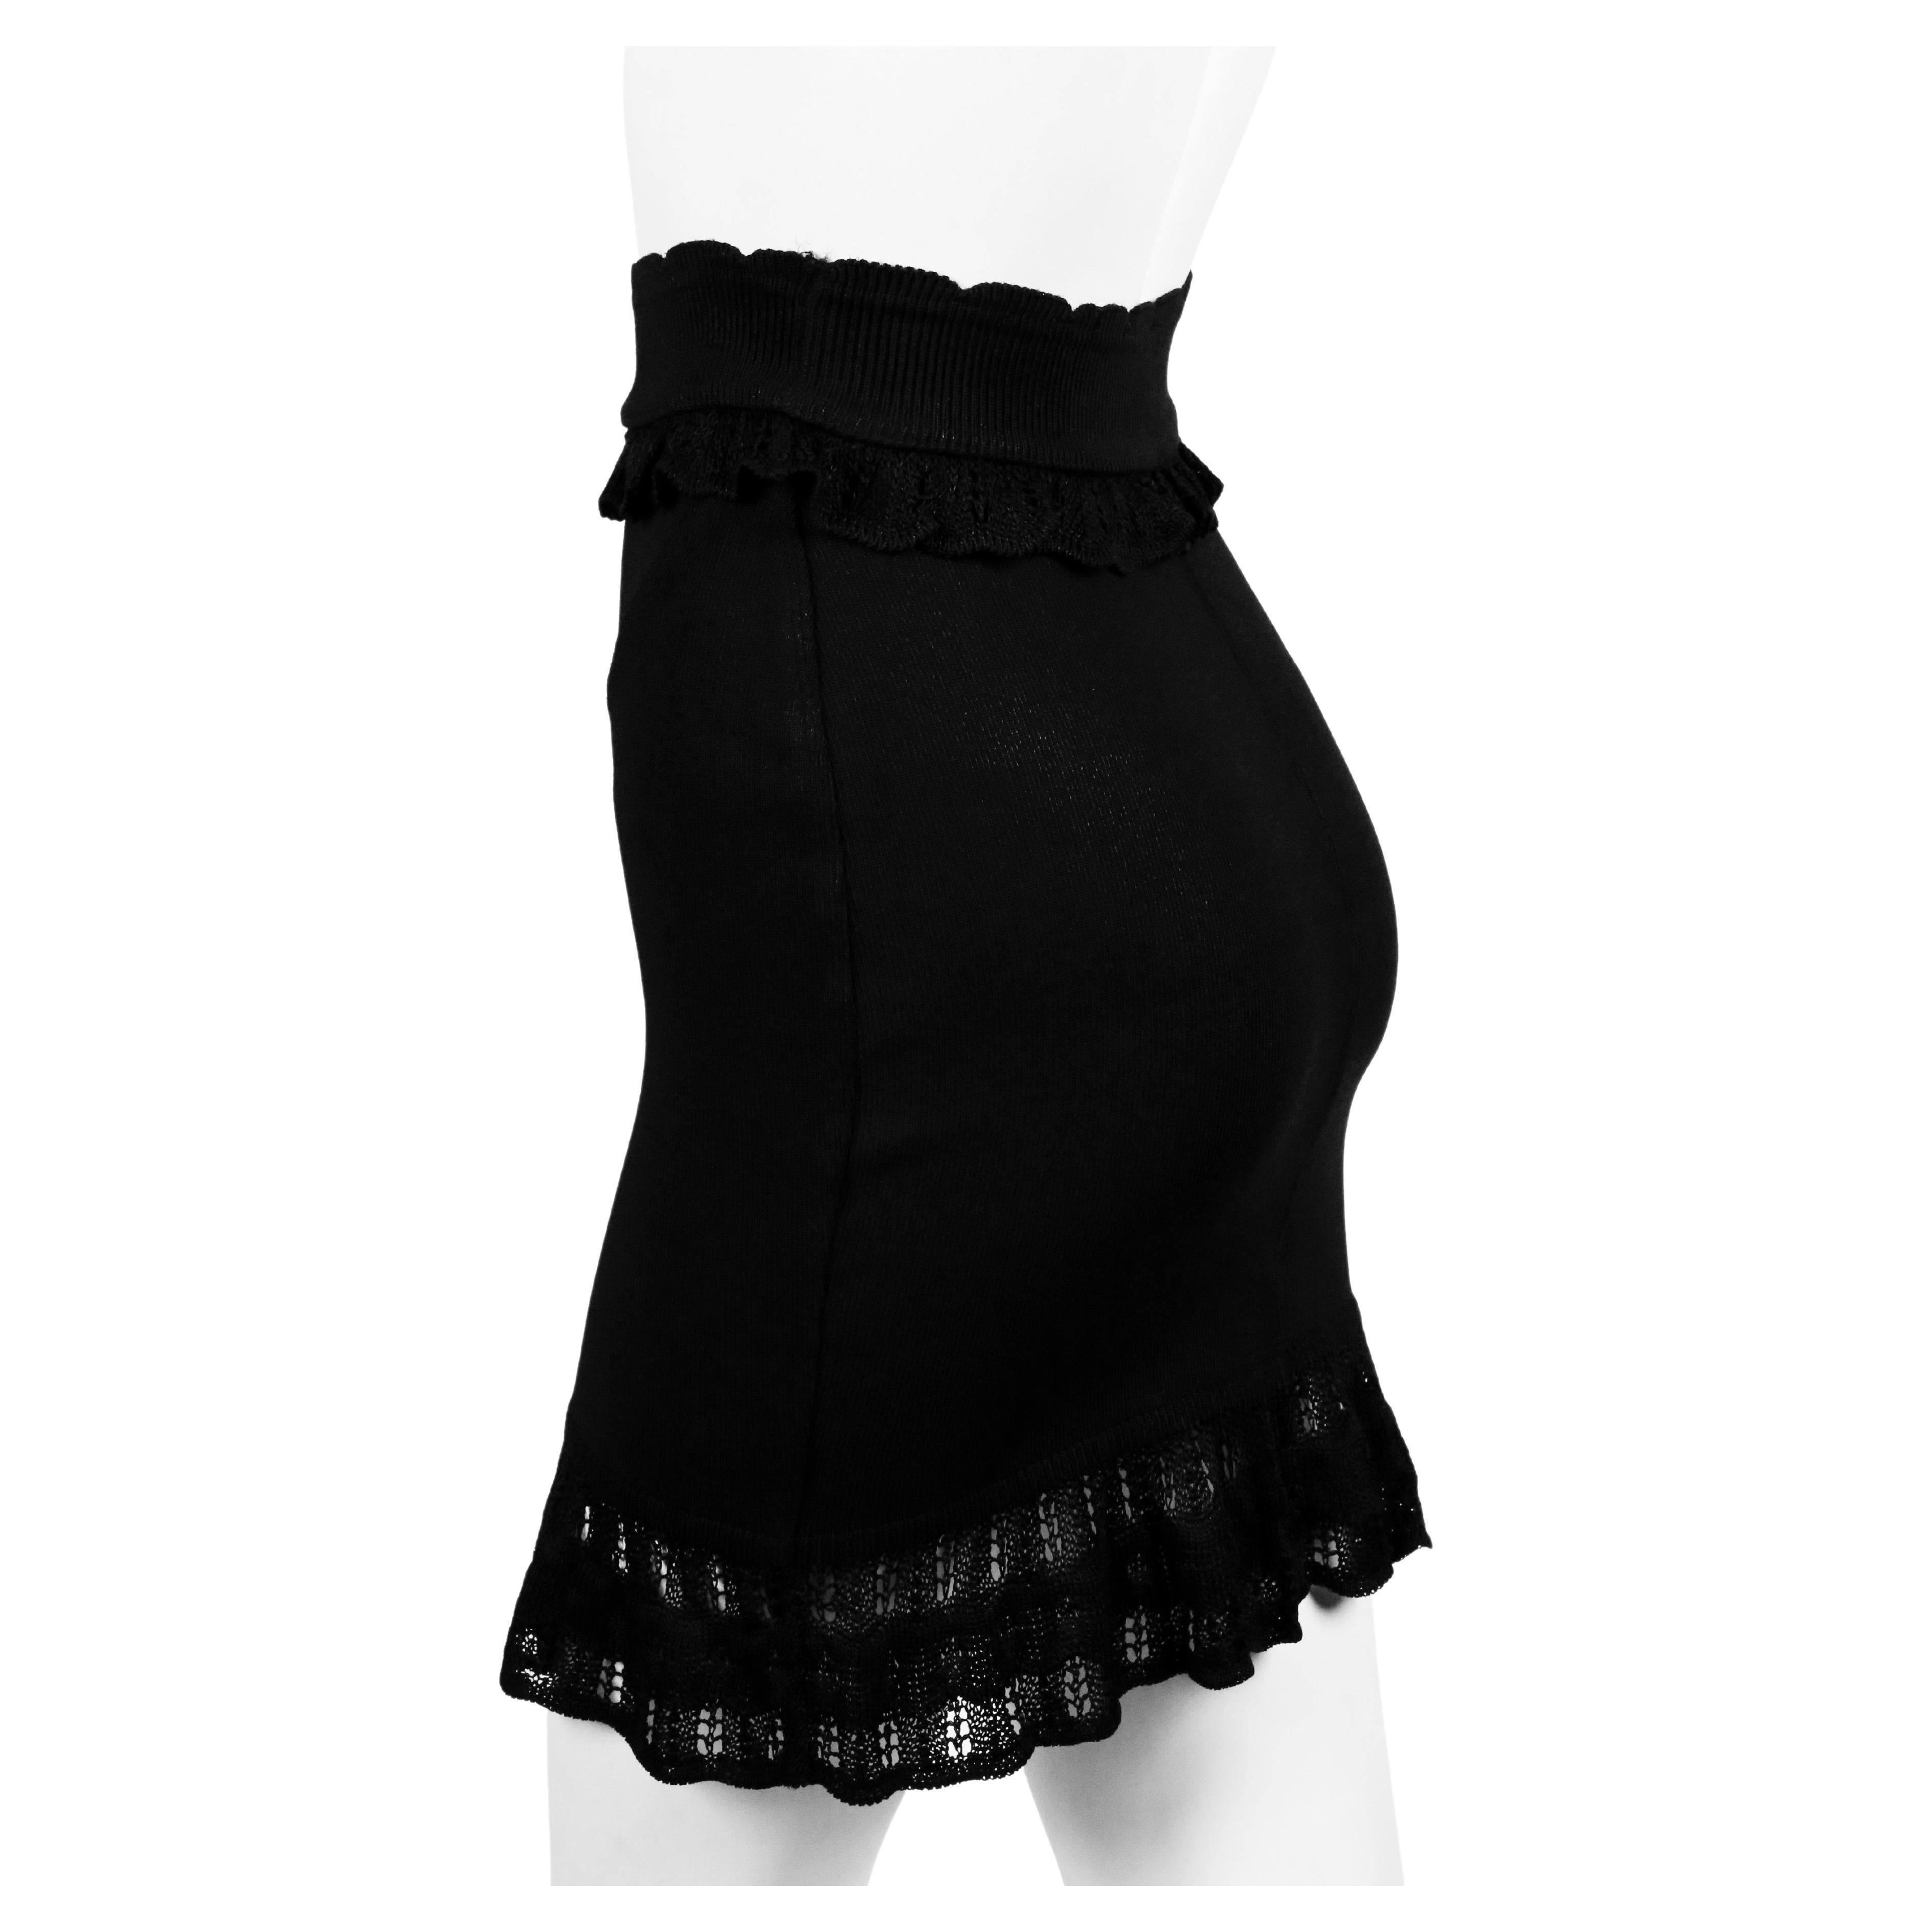 Jet-black mini skirt with ruffled trim from Azzedine Alaia dating to the 1990's. Labeled a size 'xs'. Approximate measurements: waist 22